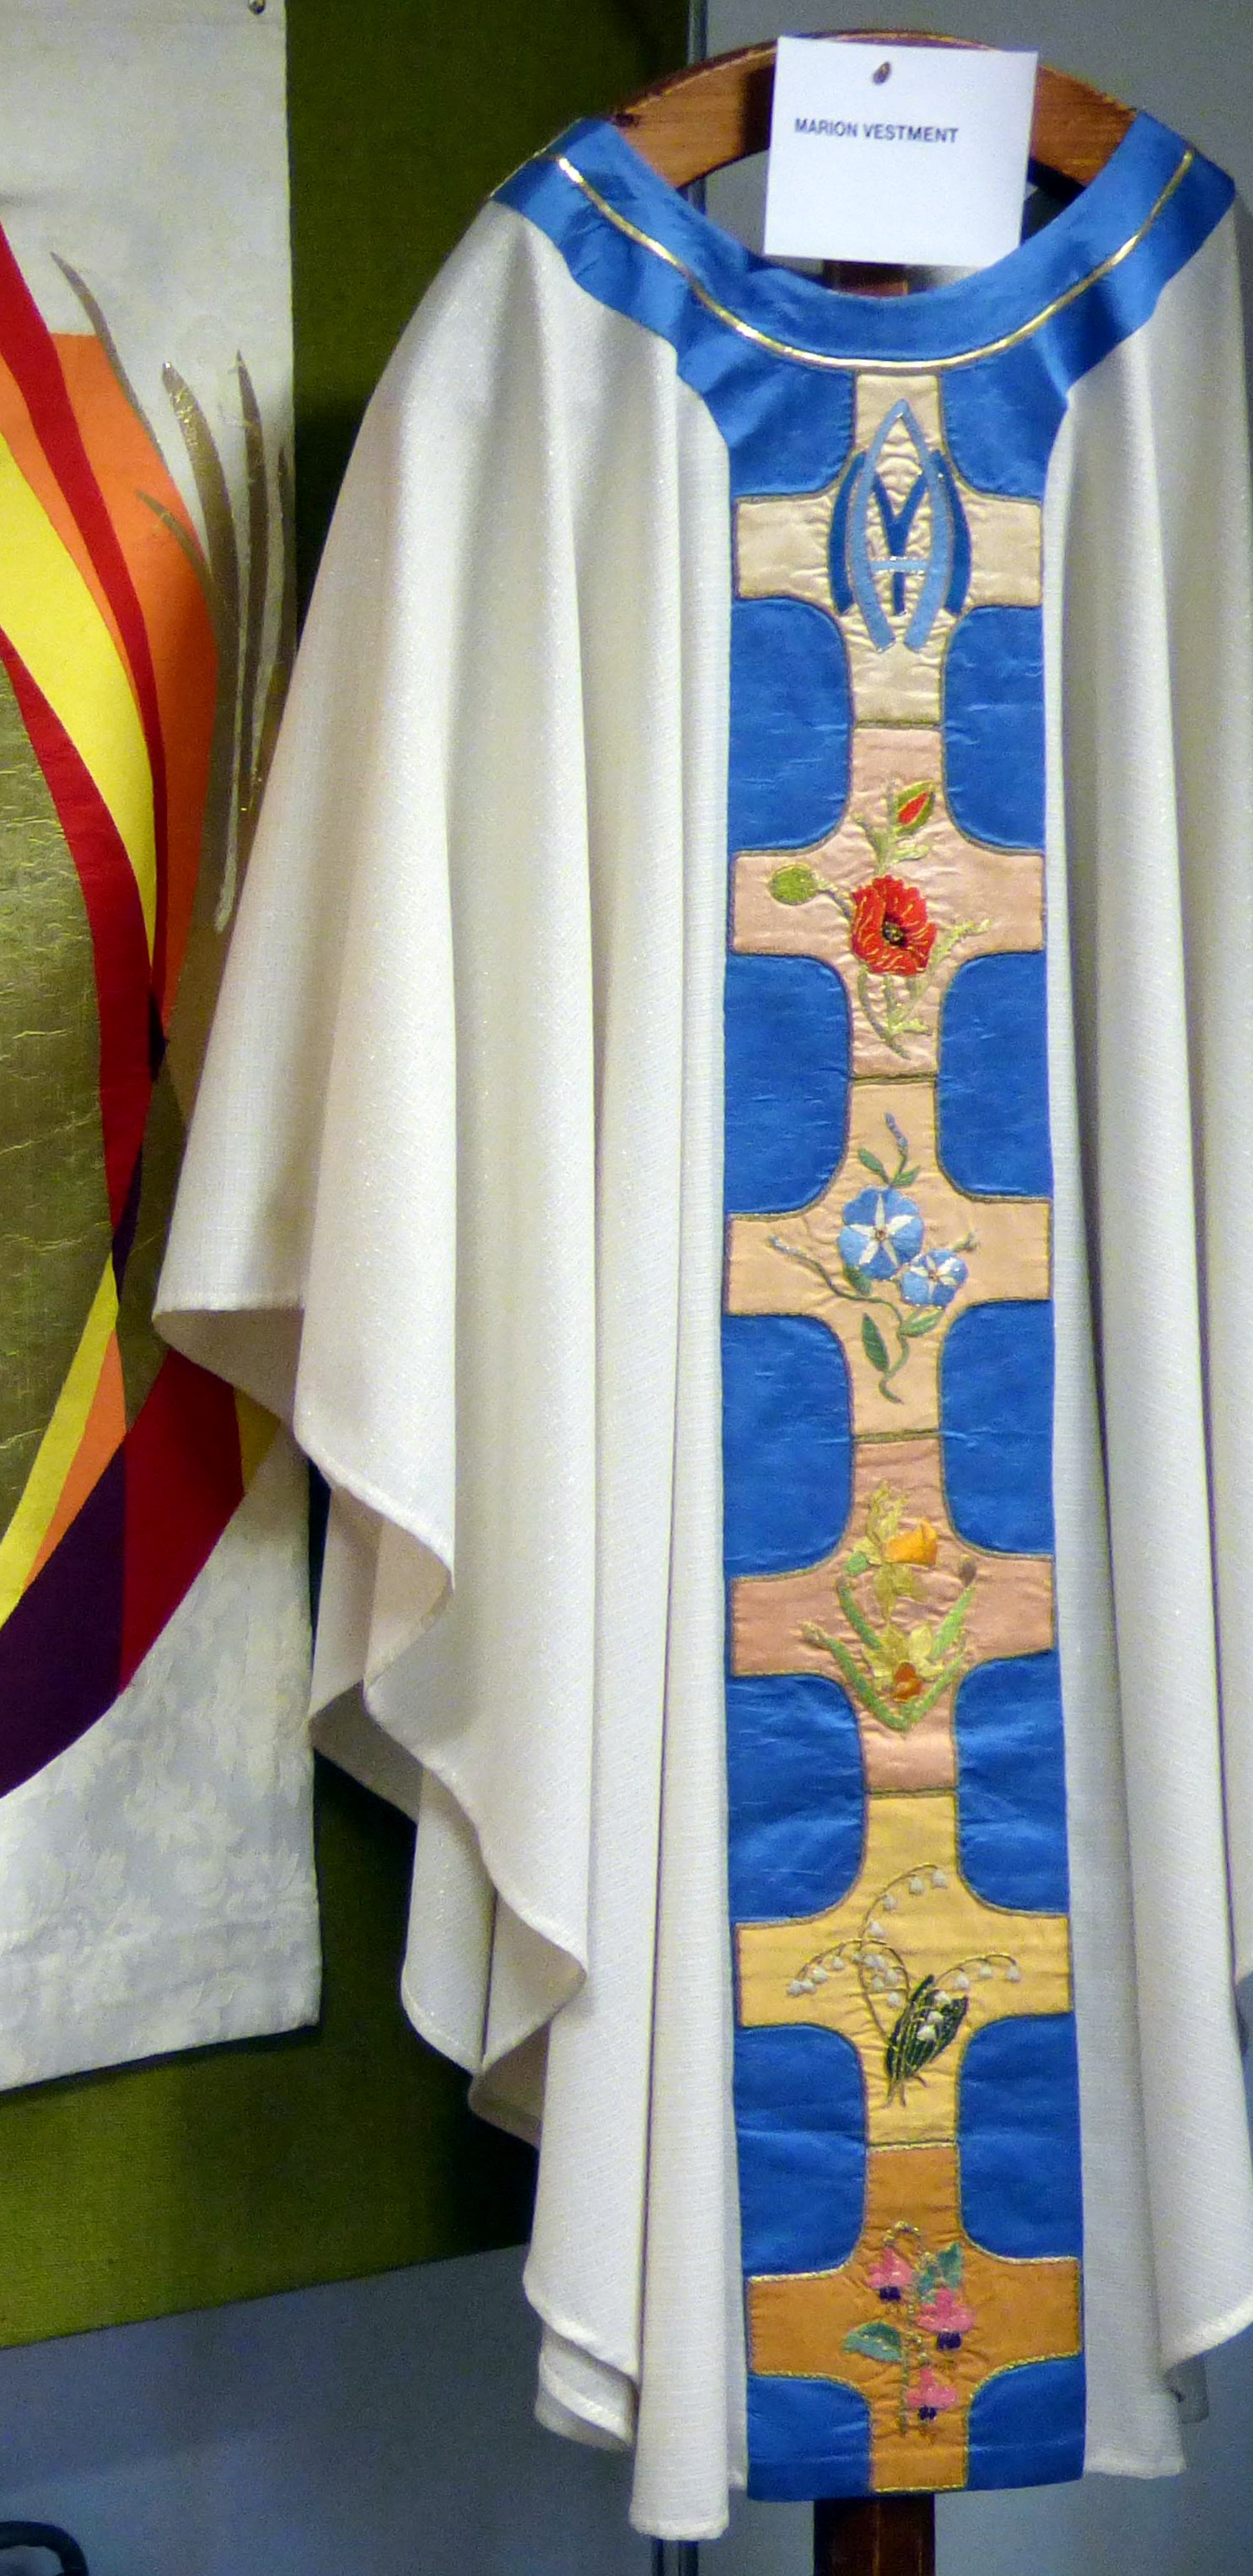 MARIAN VESTMENT at Embroidery Studio open day, Liverpool Metropolitan Cathedral 2017